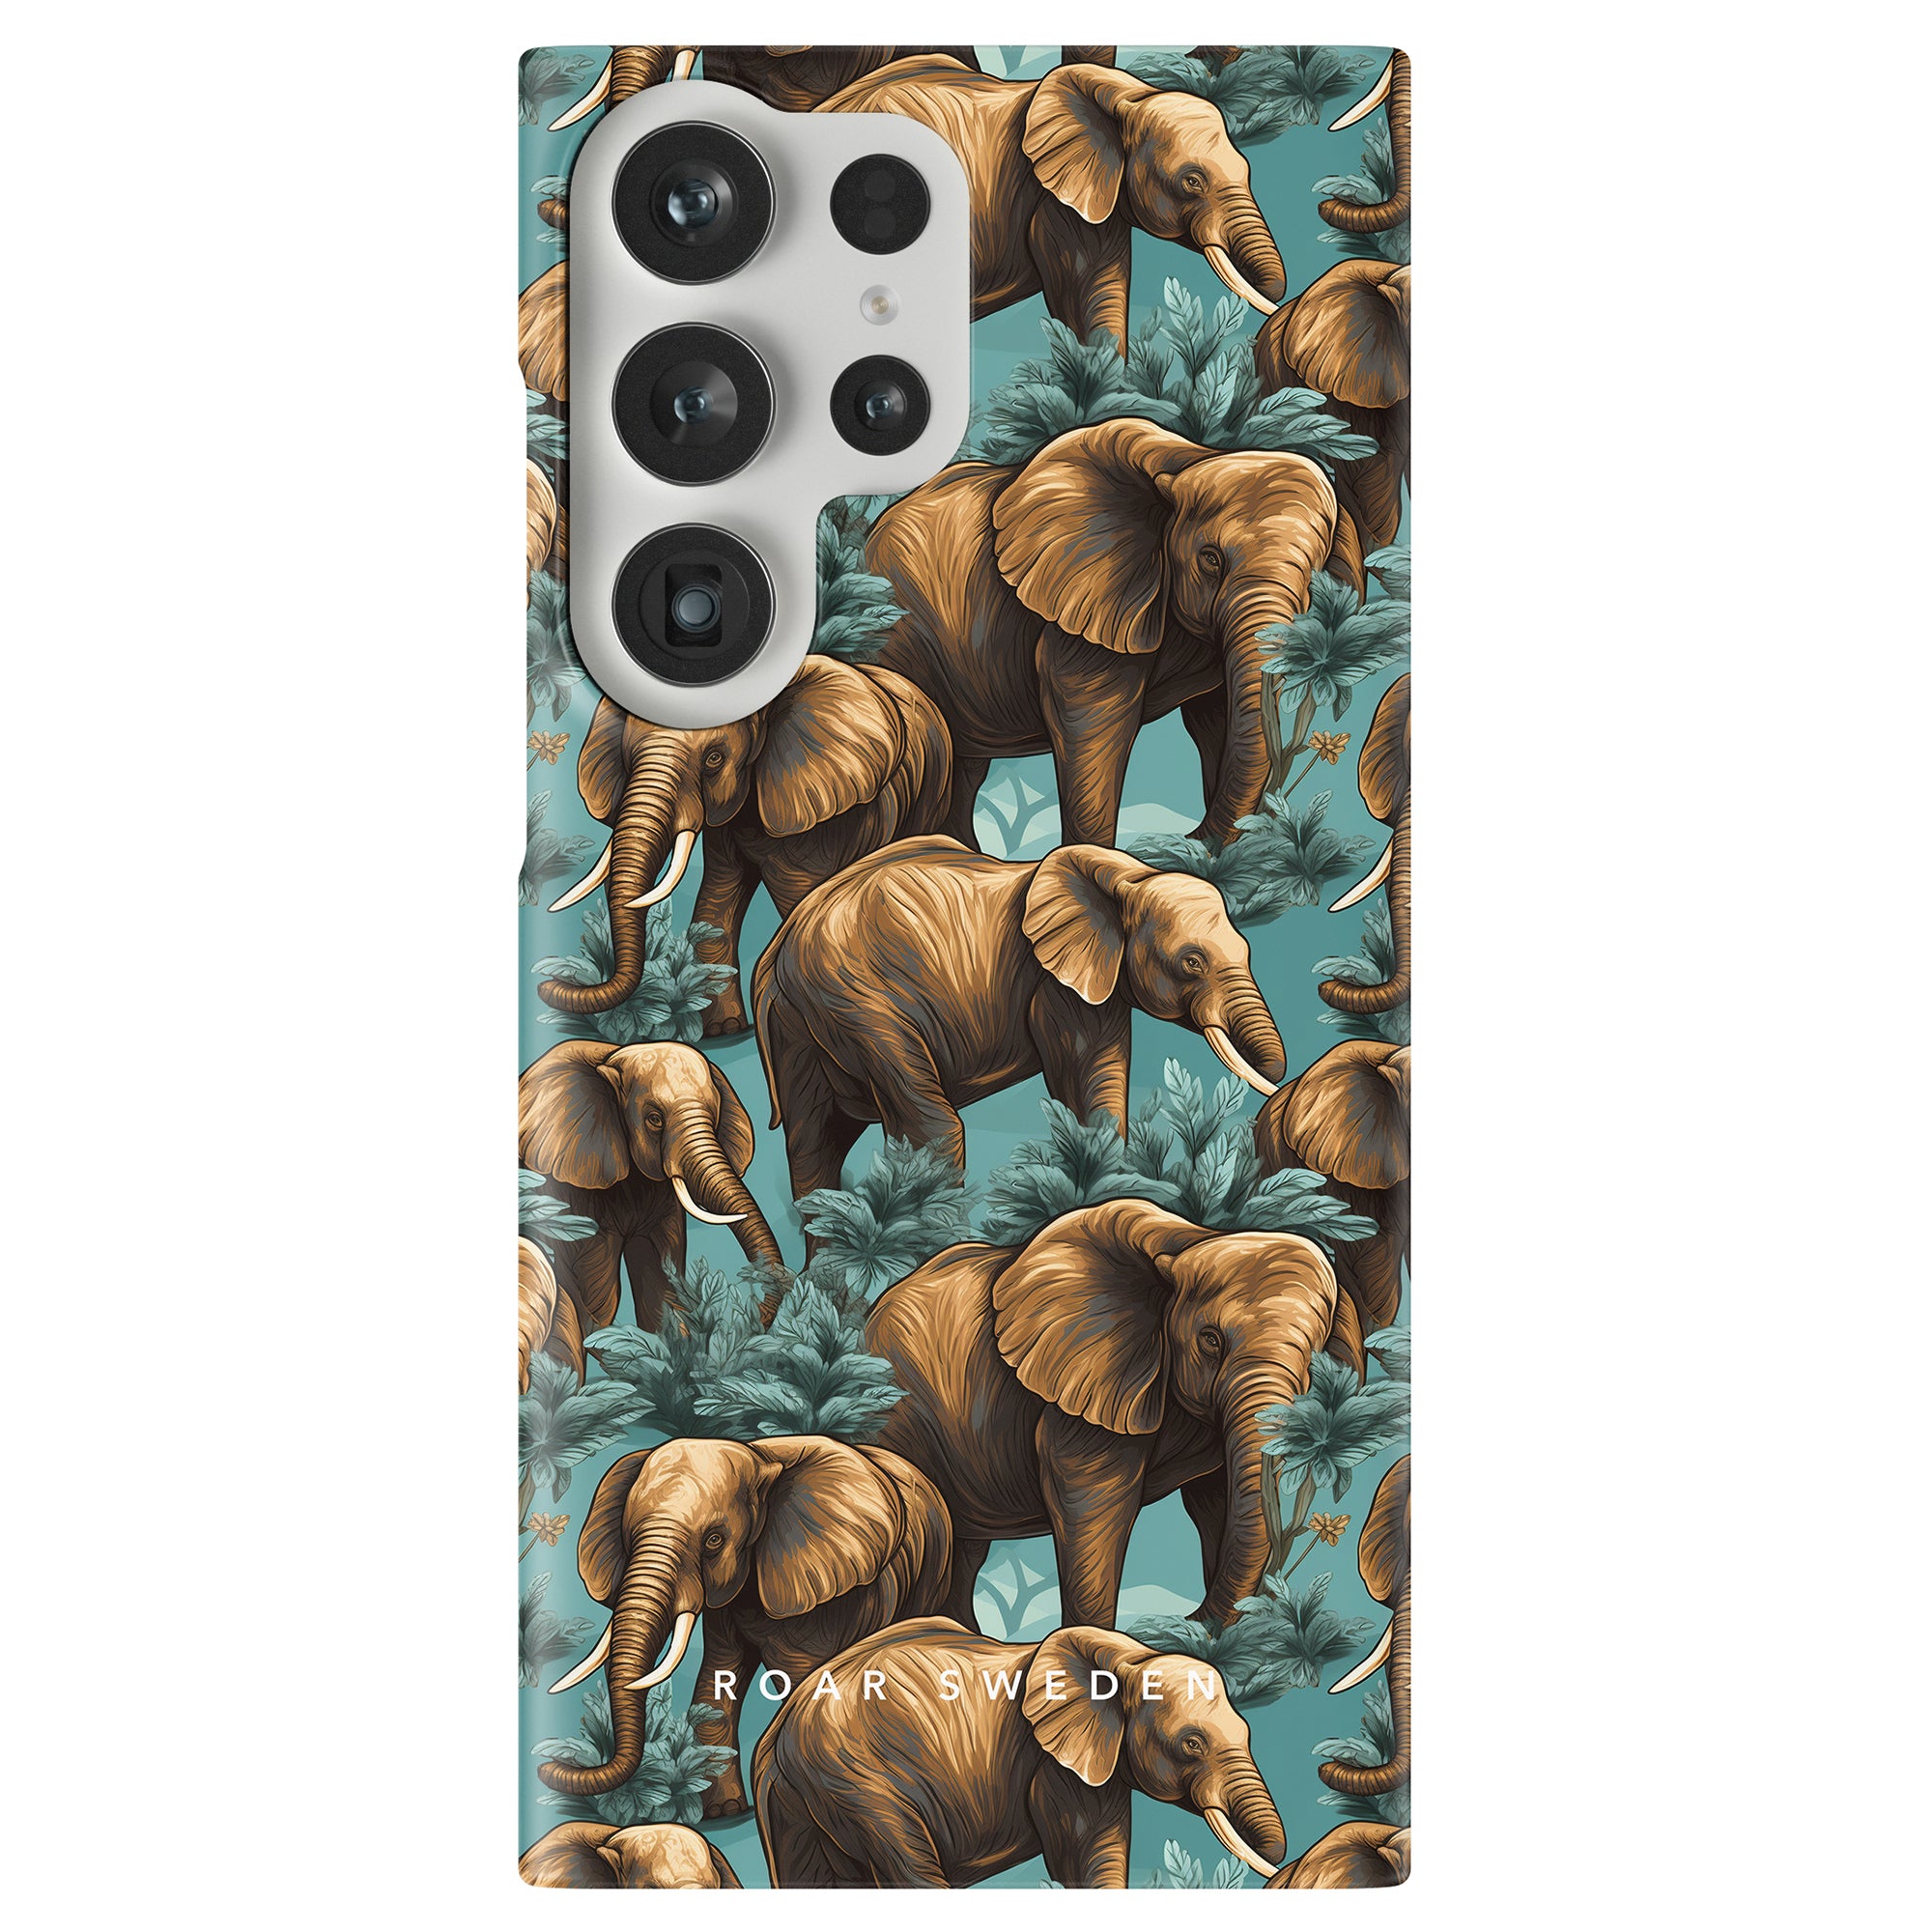 Hathi - Slim case featuring a pattern of brown elephants set against a teal background with green foliage. Part of the Safari Collection, the brand name "ROAR SWEDEN" is visible at the bottom.